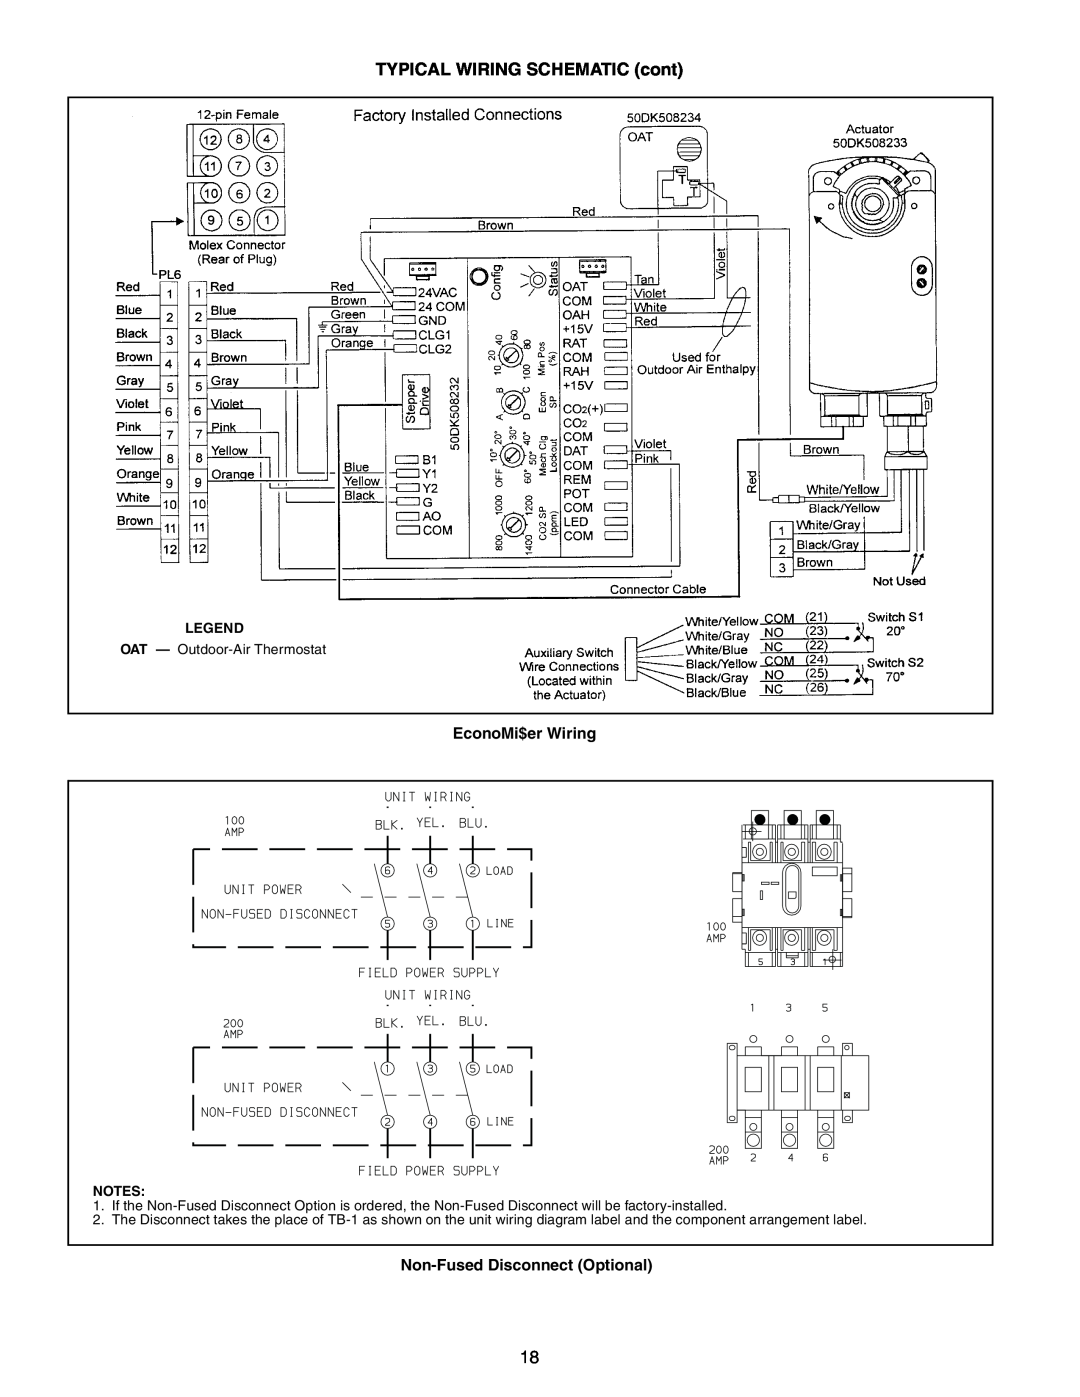 Bryant 558F, 551B, 551A manual TYPICAL WIRING SCHEMATIC cont, EconoMi$er Wiring, Non-Fused Disconnect Optional 